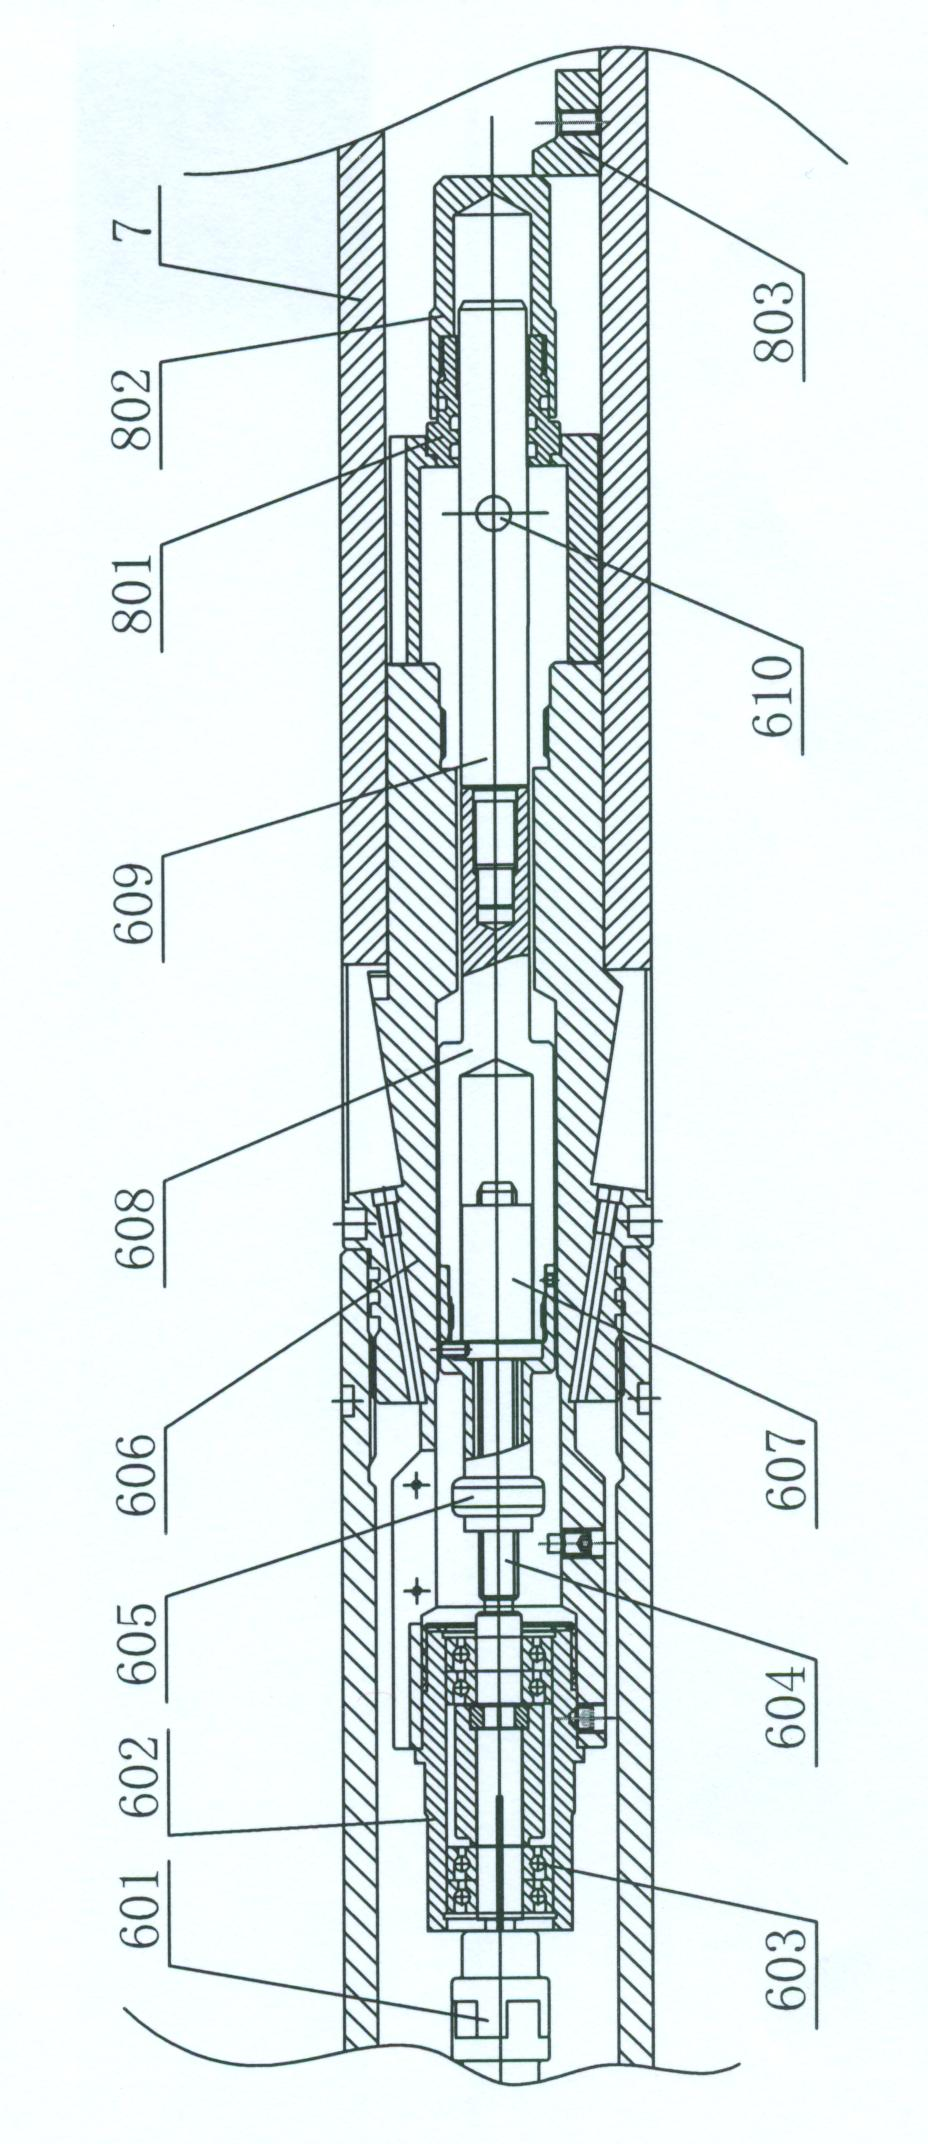 Microsphere logging instrument sidewall contact device